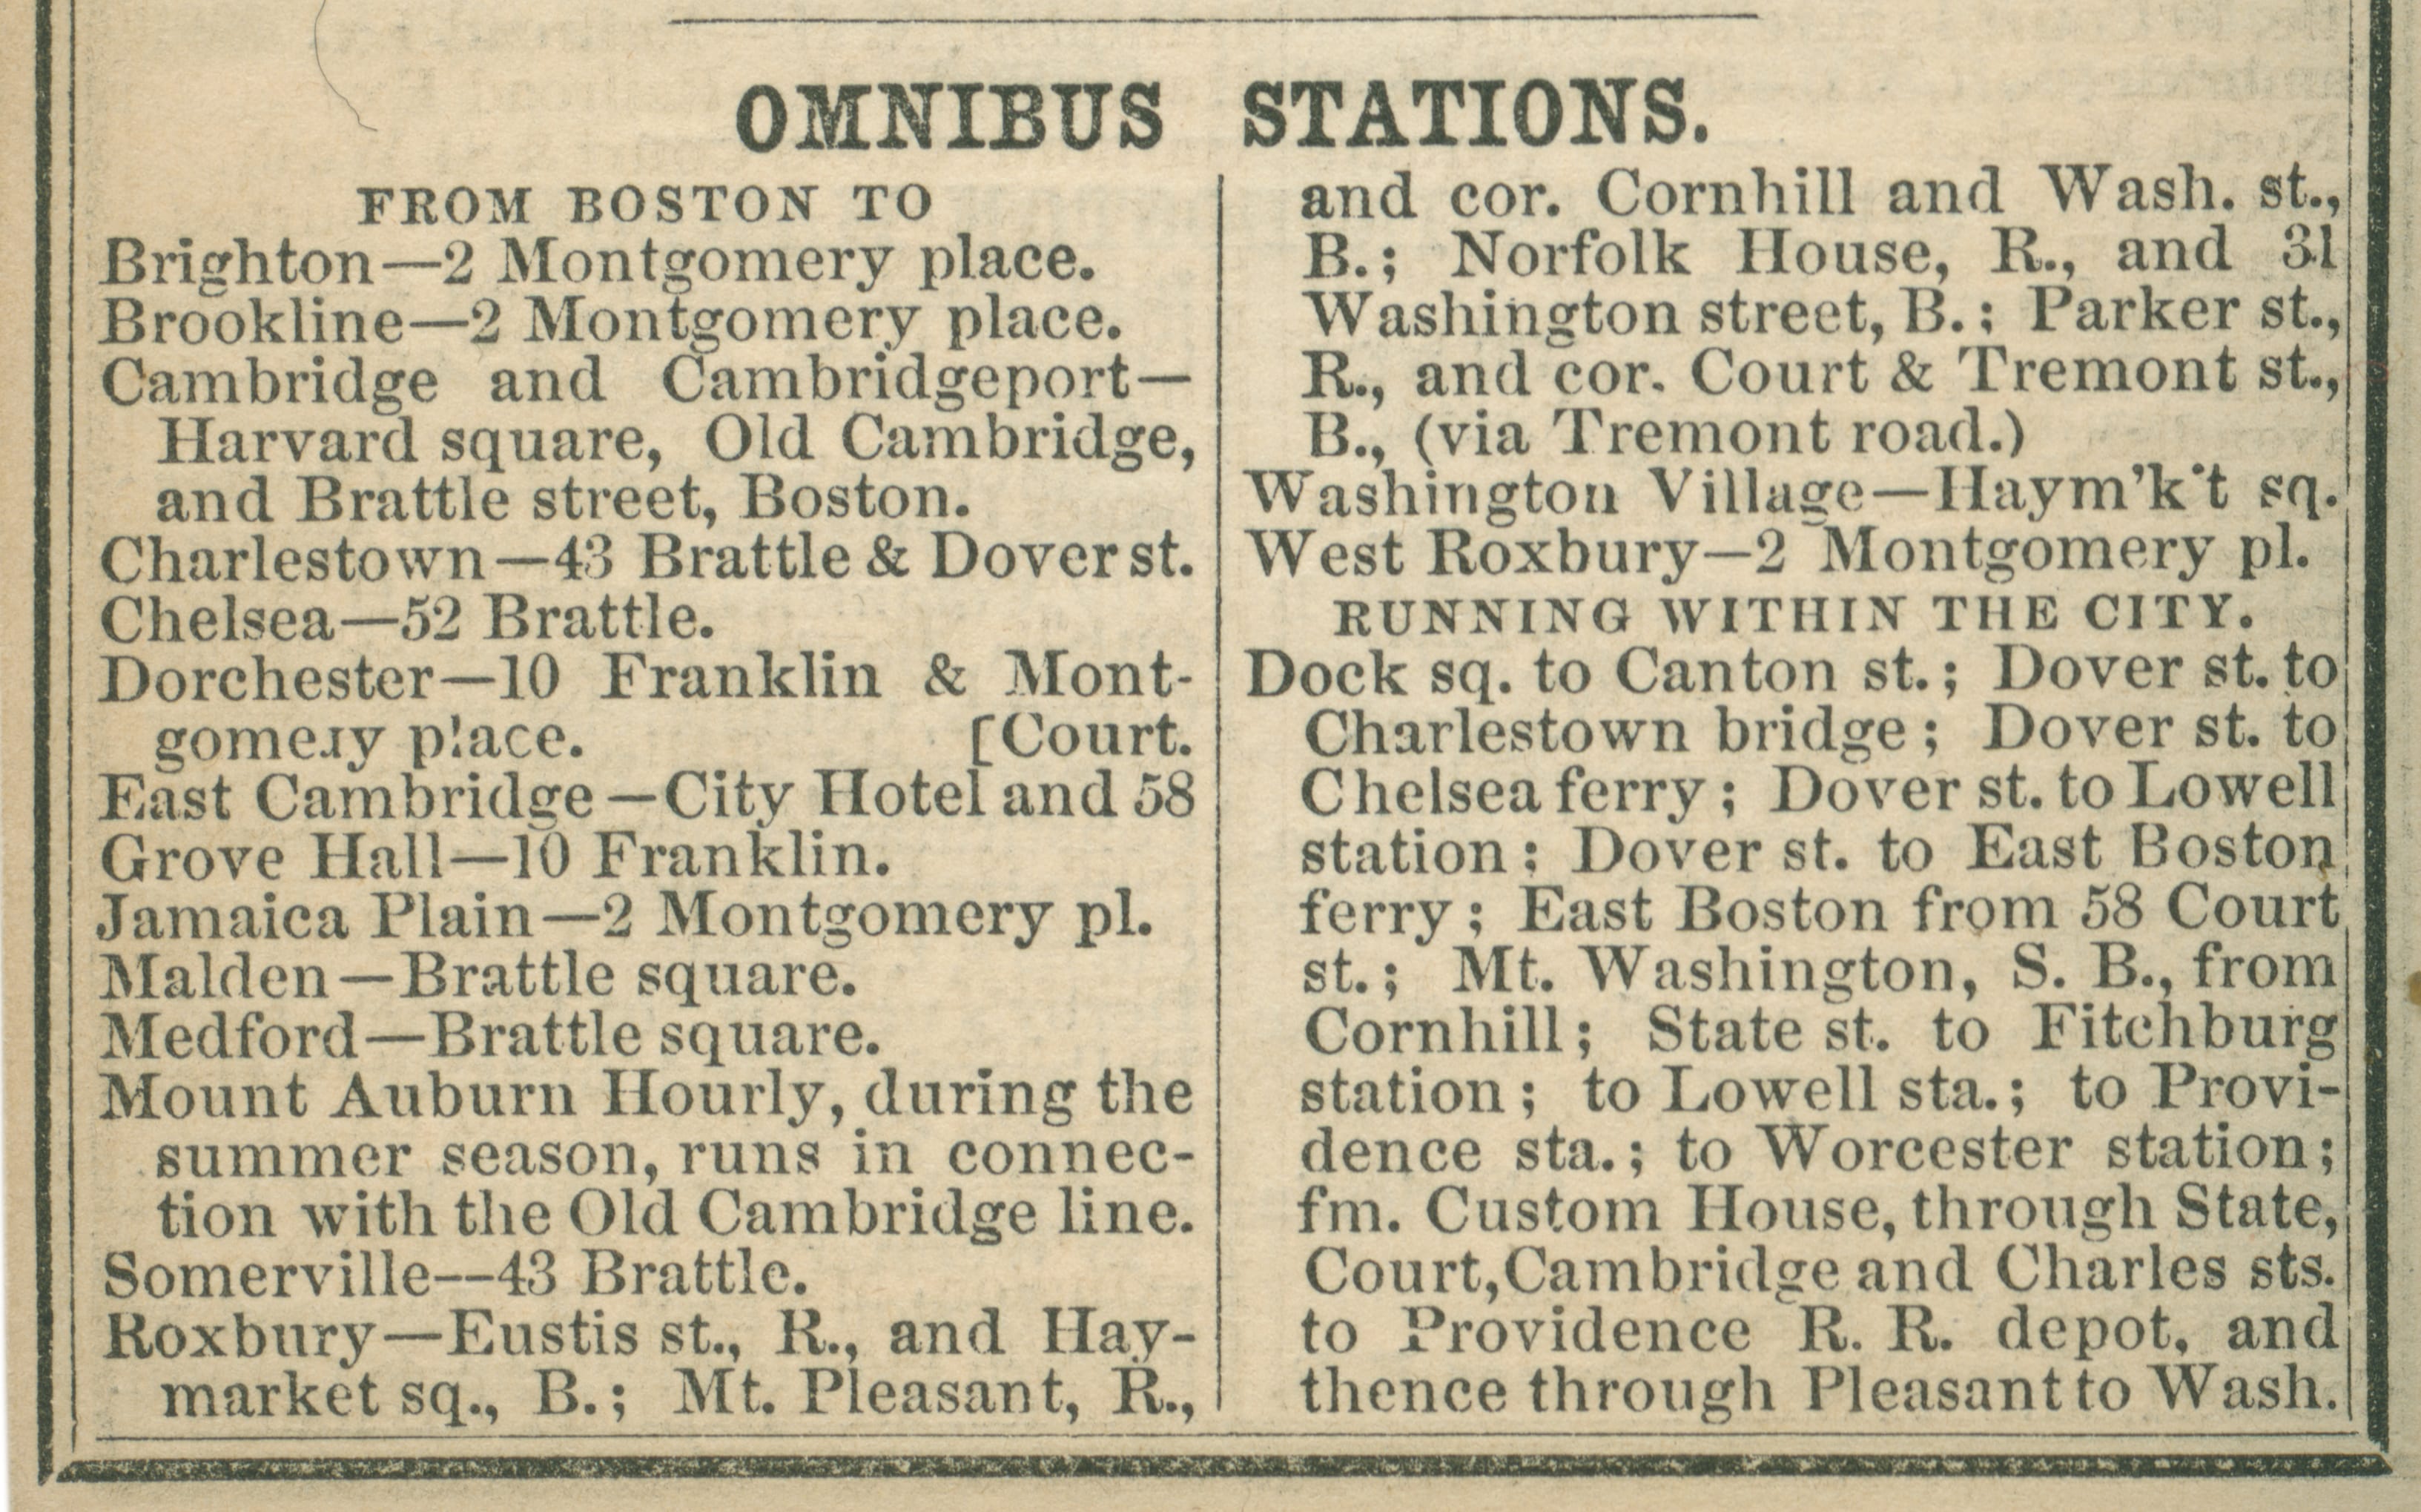 Image of “Omnibus Stations” from “The Boston Almanac for the Year 1850”